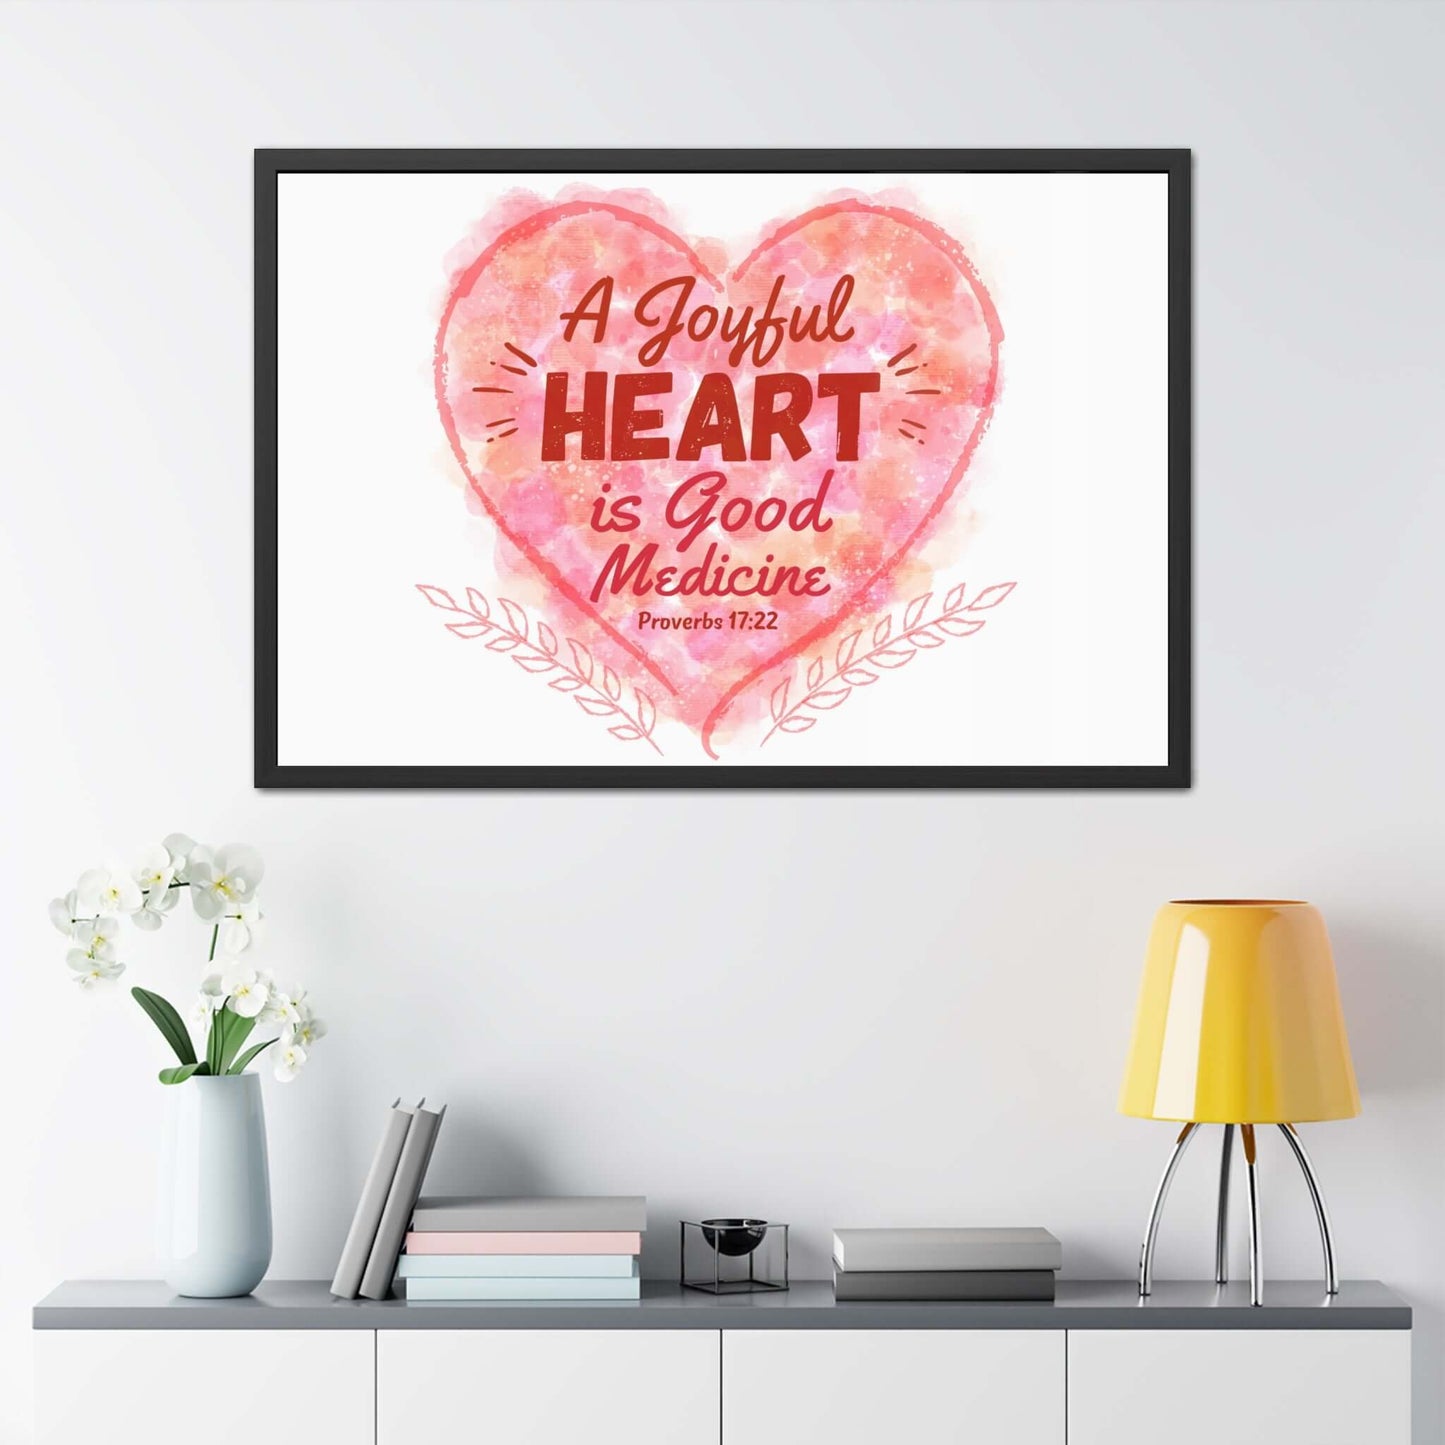 Room Poster with Hand-Crafted Wooden Frame - Featuring Proverbs 17:22 | Art & Wall Decor,Framed,Hanging Hardware,Home & Living,Poster,Posters